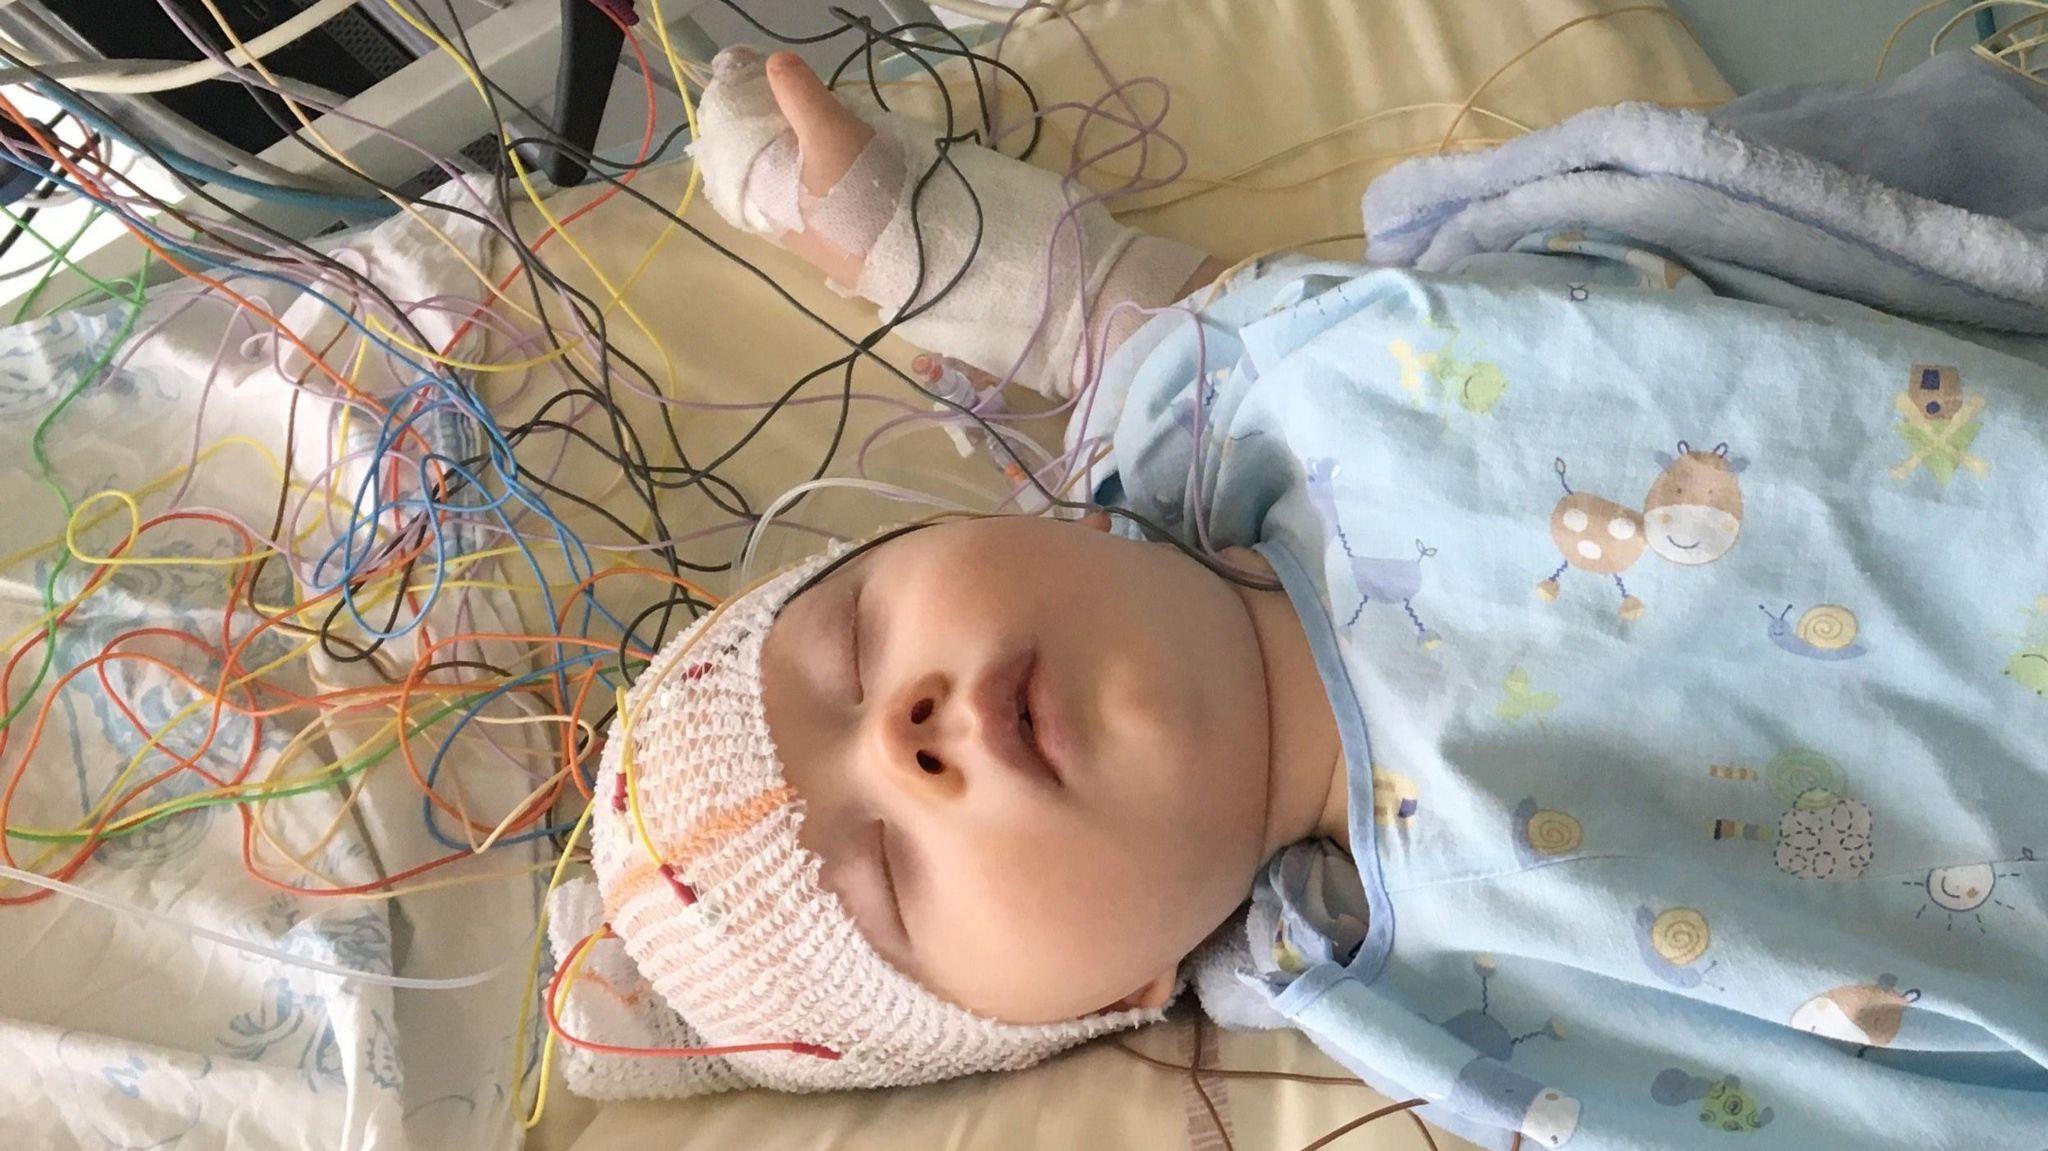 Baby Henry asleep in a hospital bed with multiple coloured wires attached with a bandage around his head